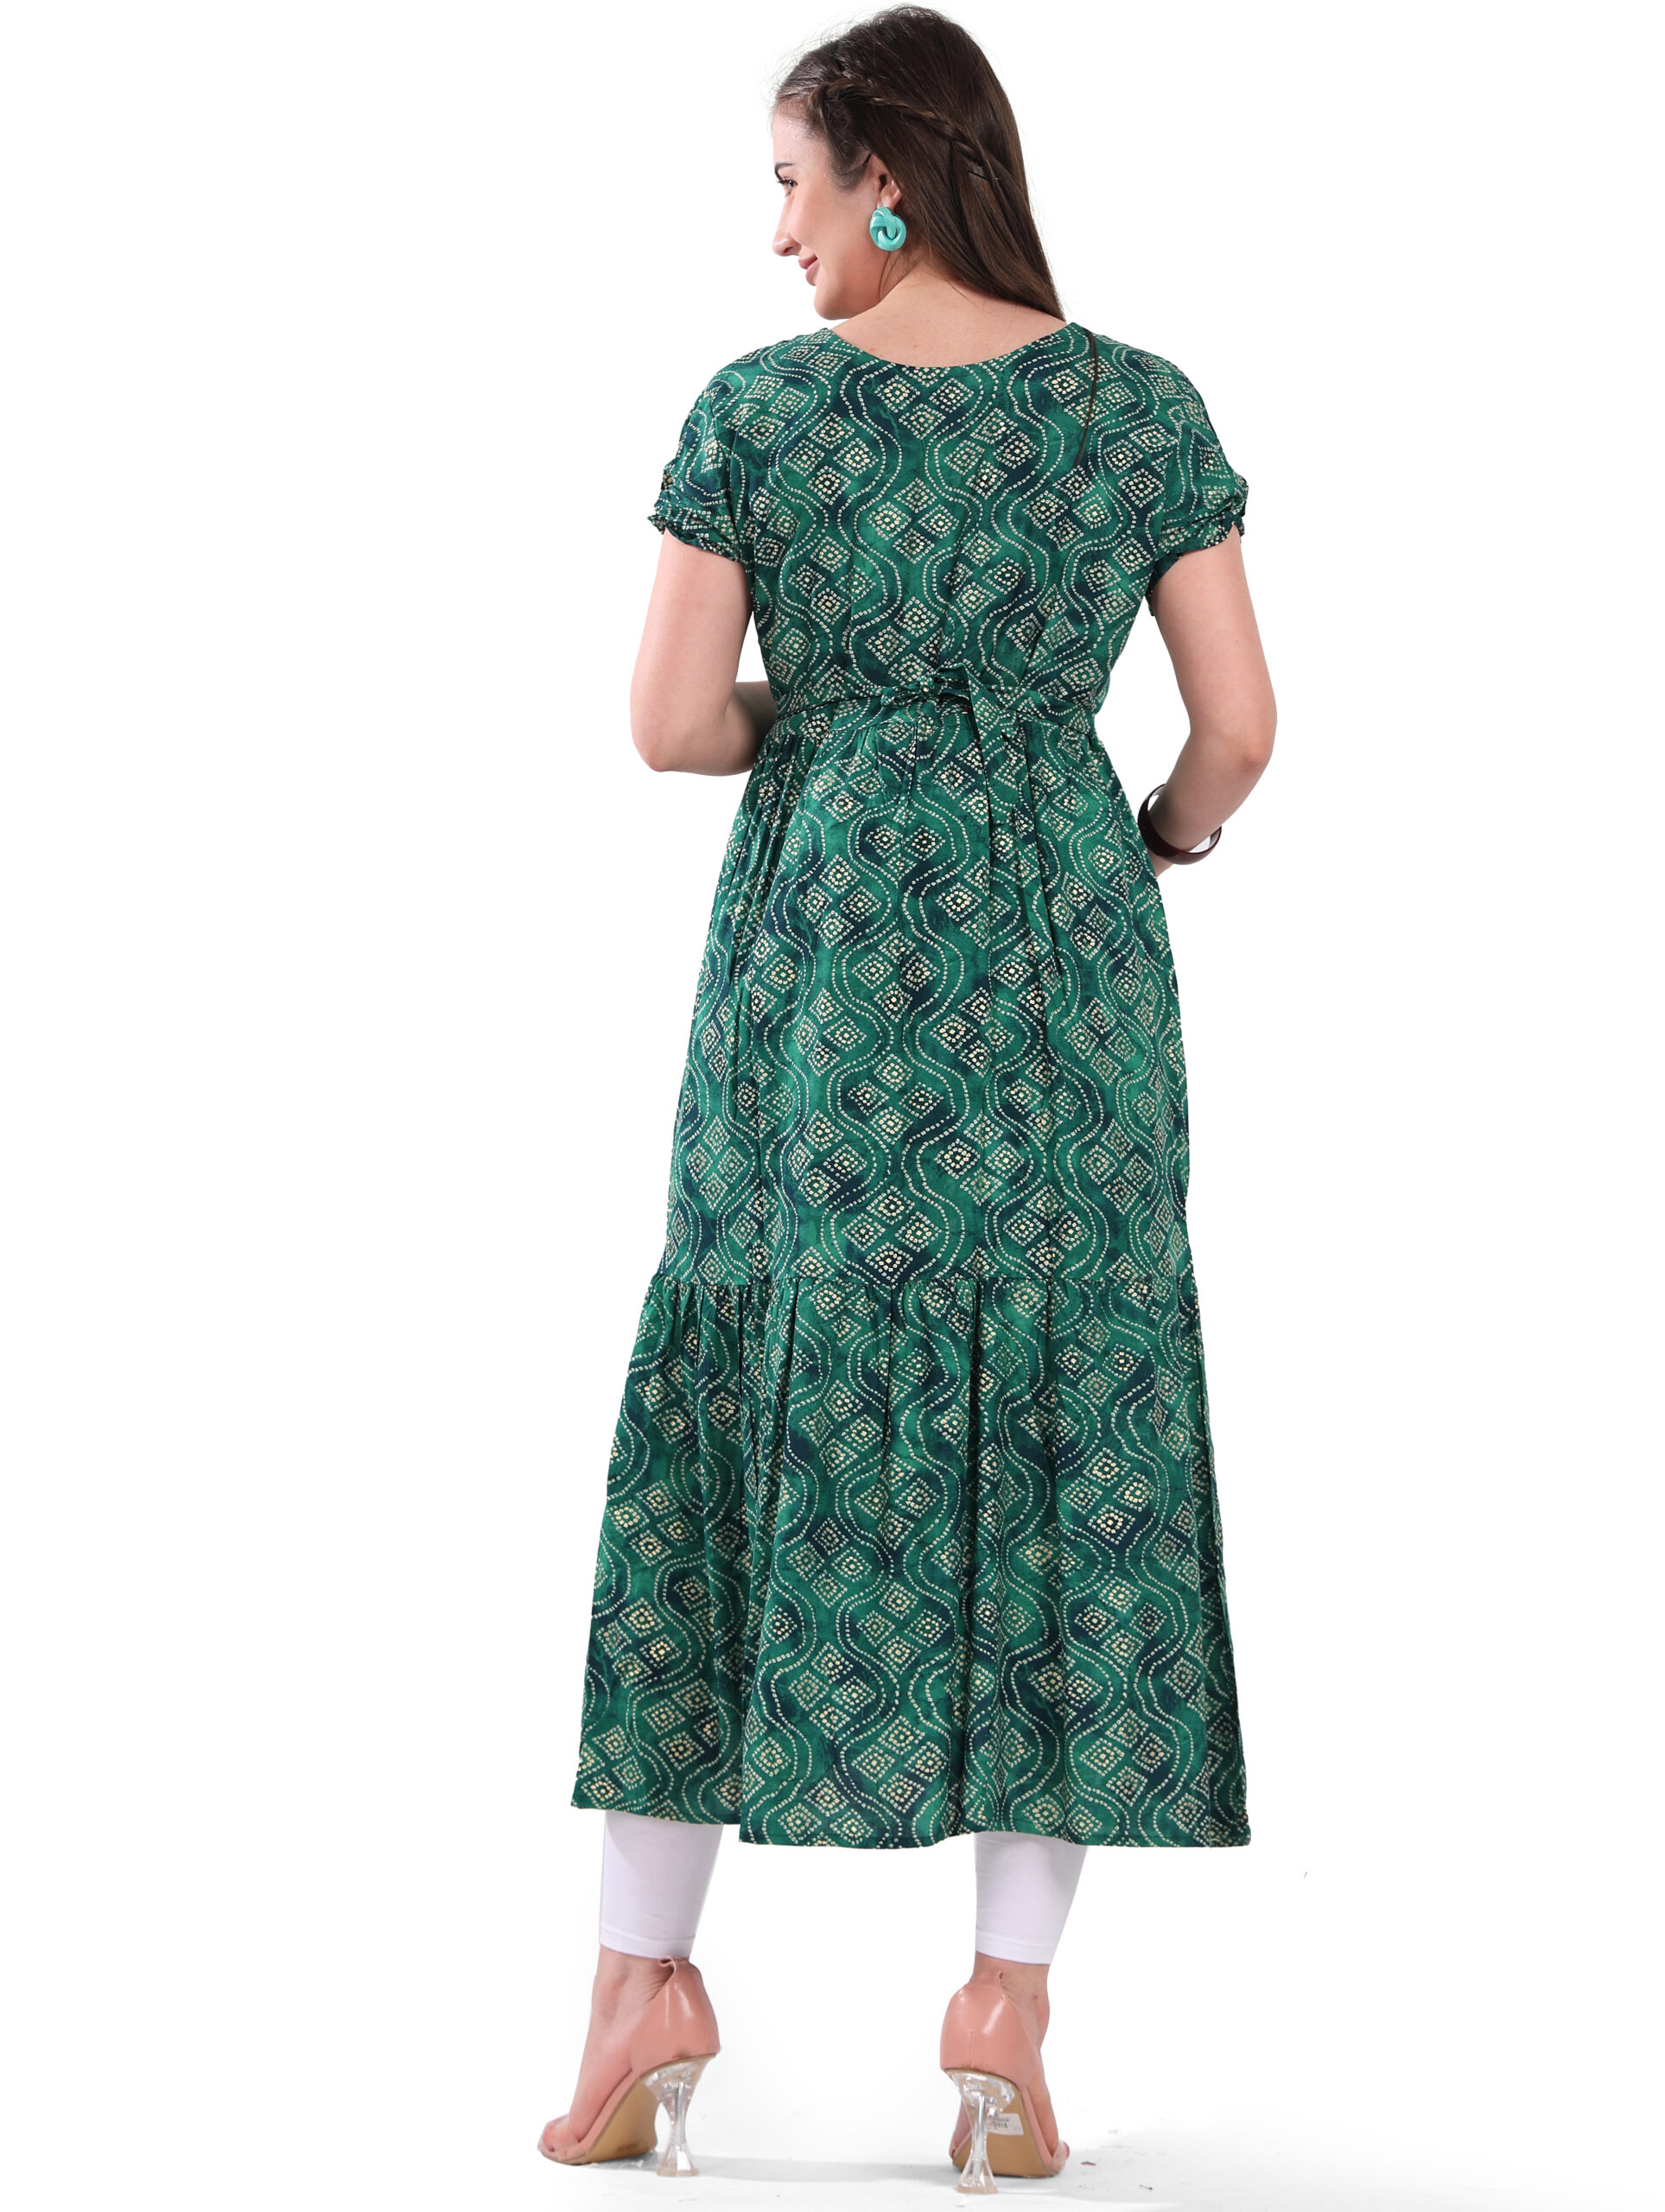 Buy maternity feeding kurtis with zip in India @ Limeroad